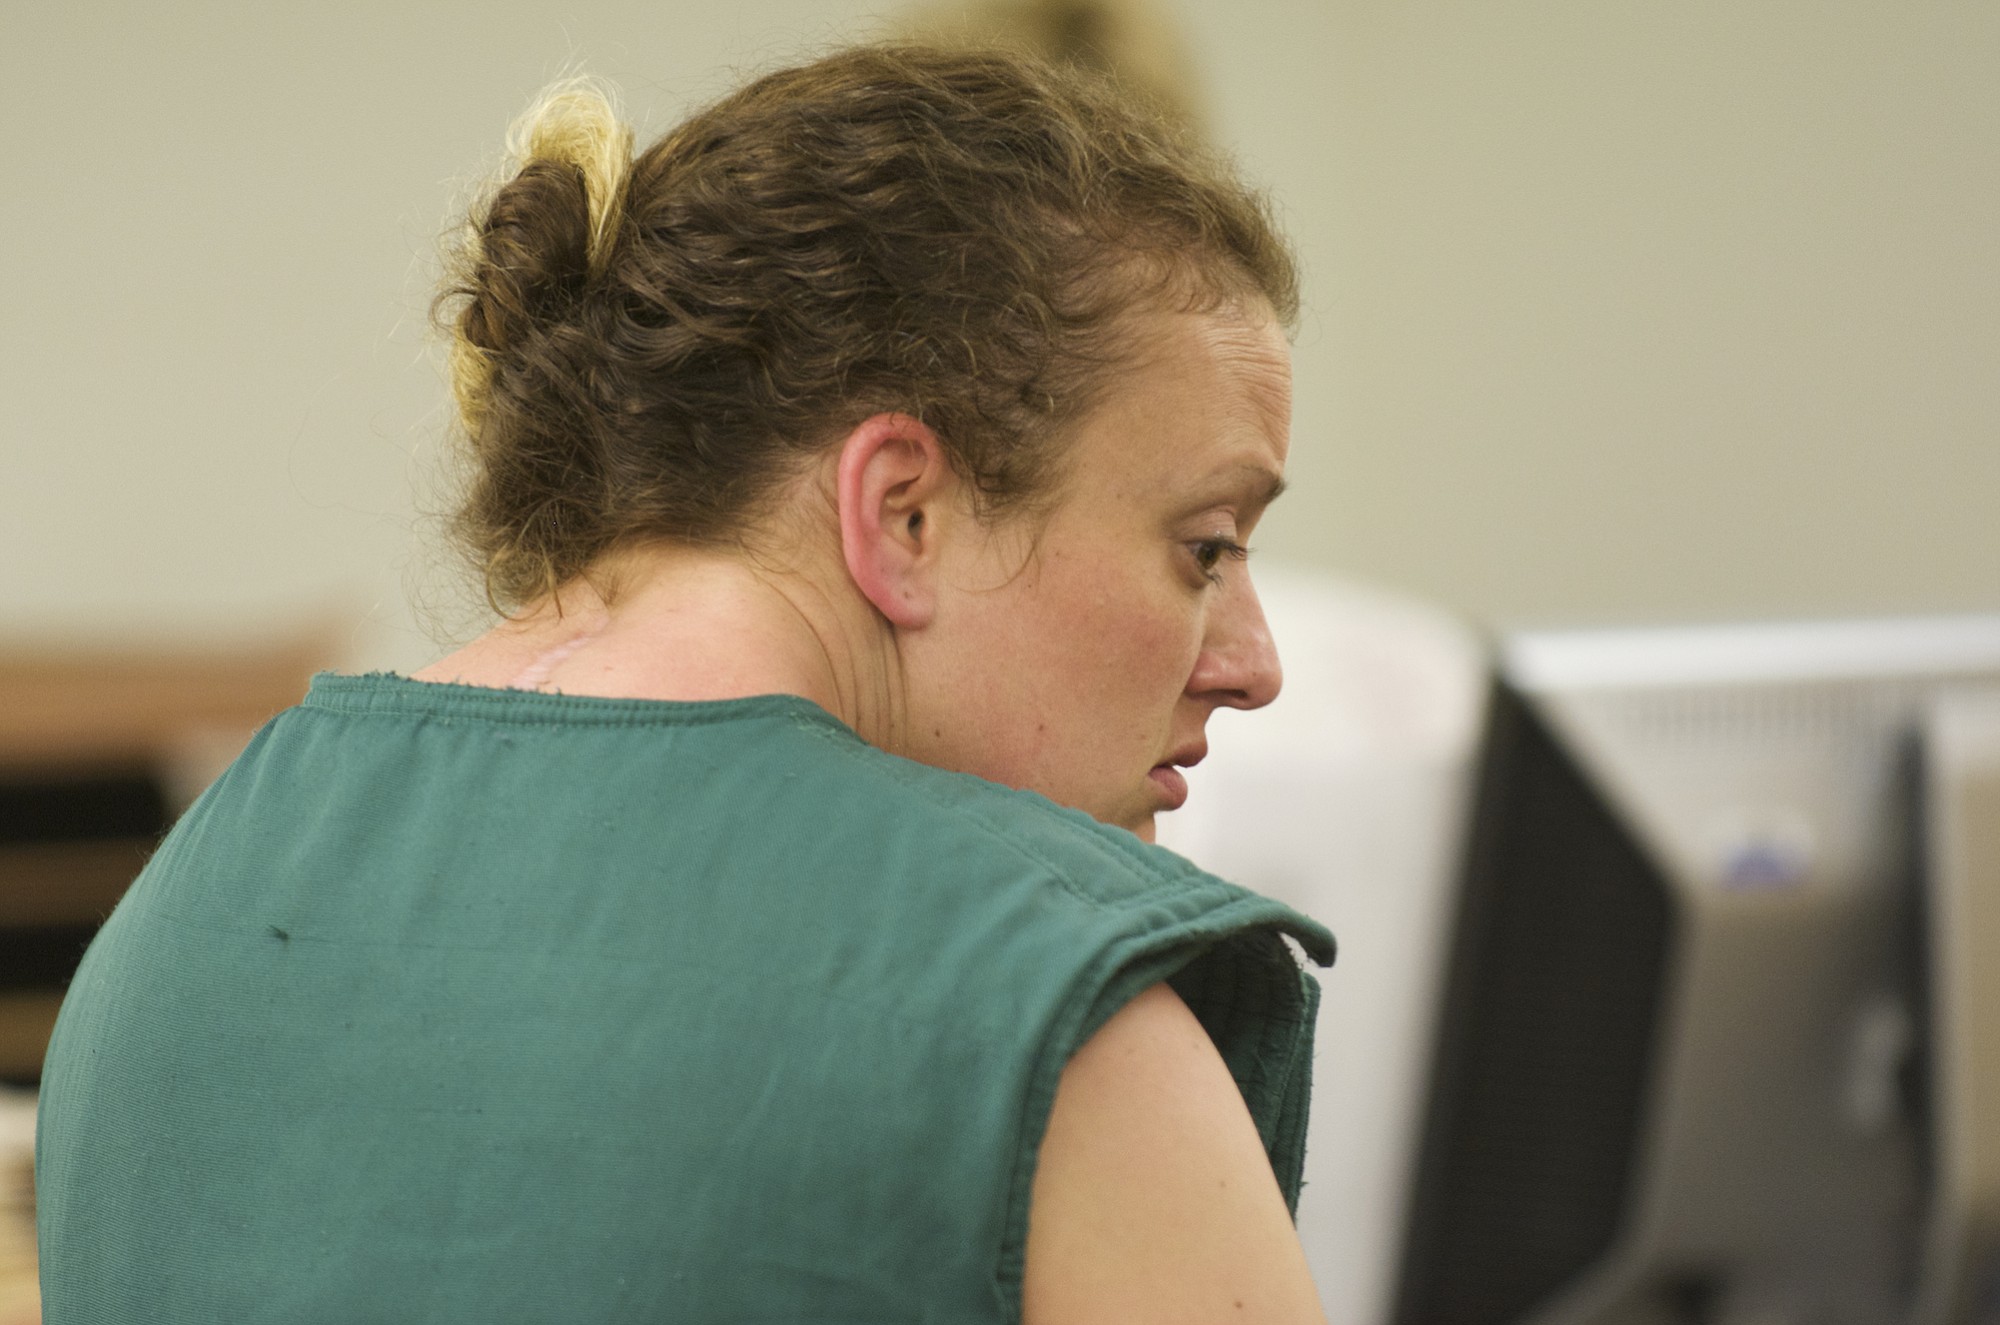 Tanya Leffler makes her first appearance in Clark County Superior Court July 10 on suspicion of vehicular homicide.